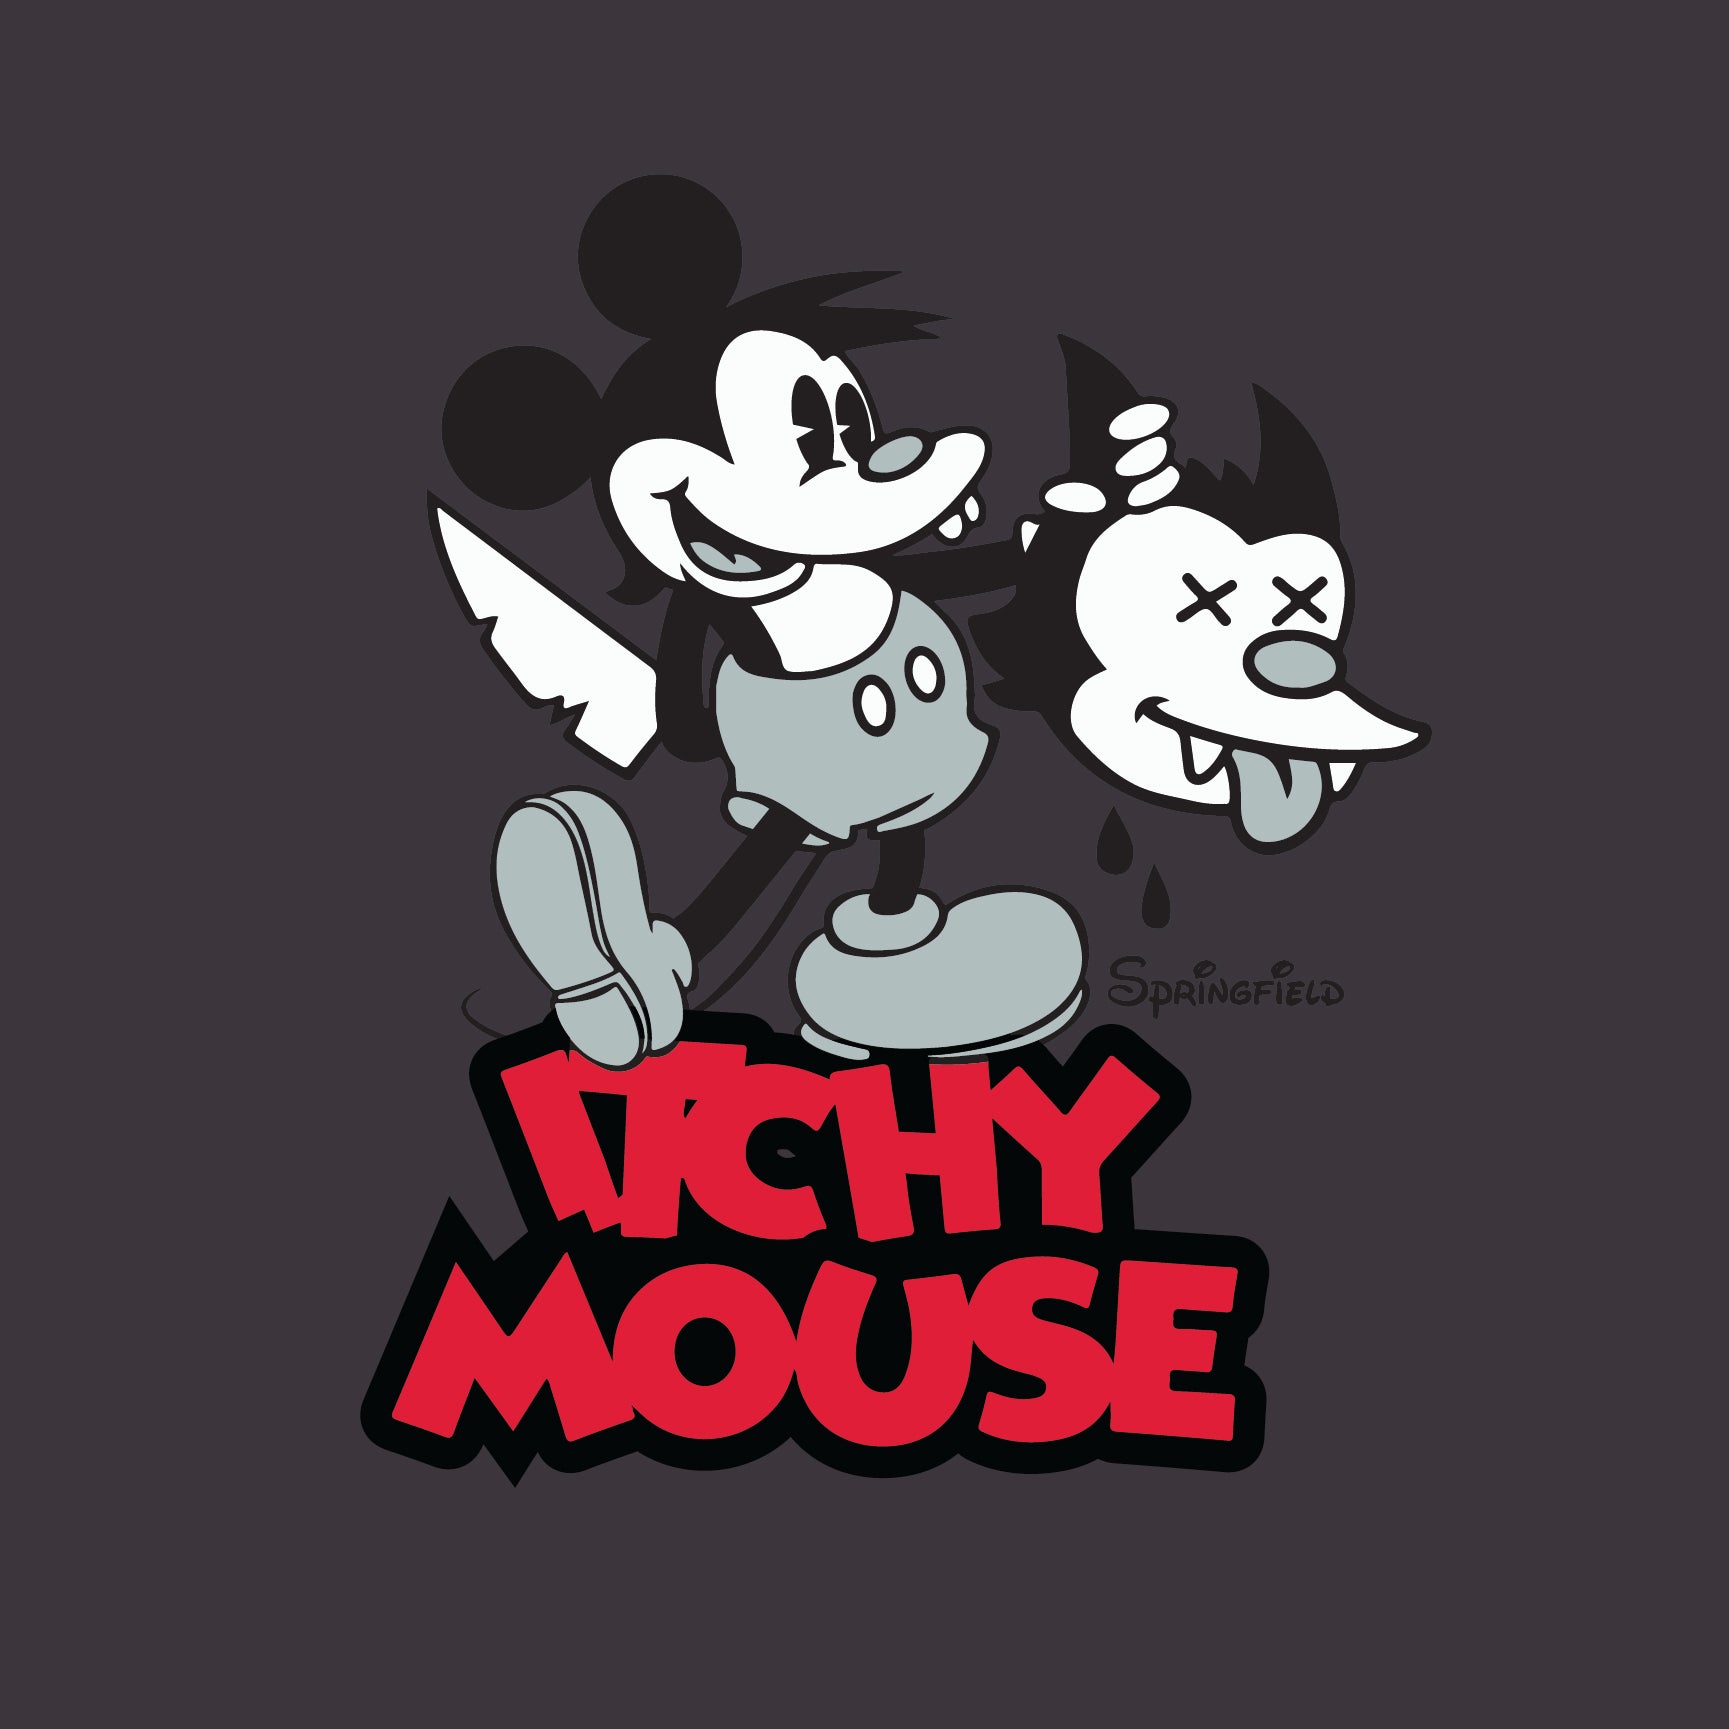 CBC x Toygami | Itchy Mouse Unisex Tee